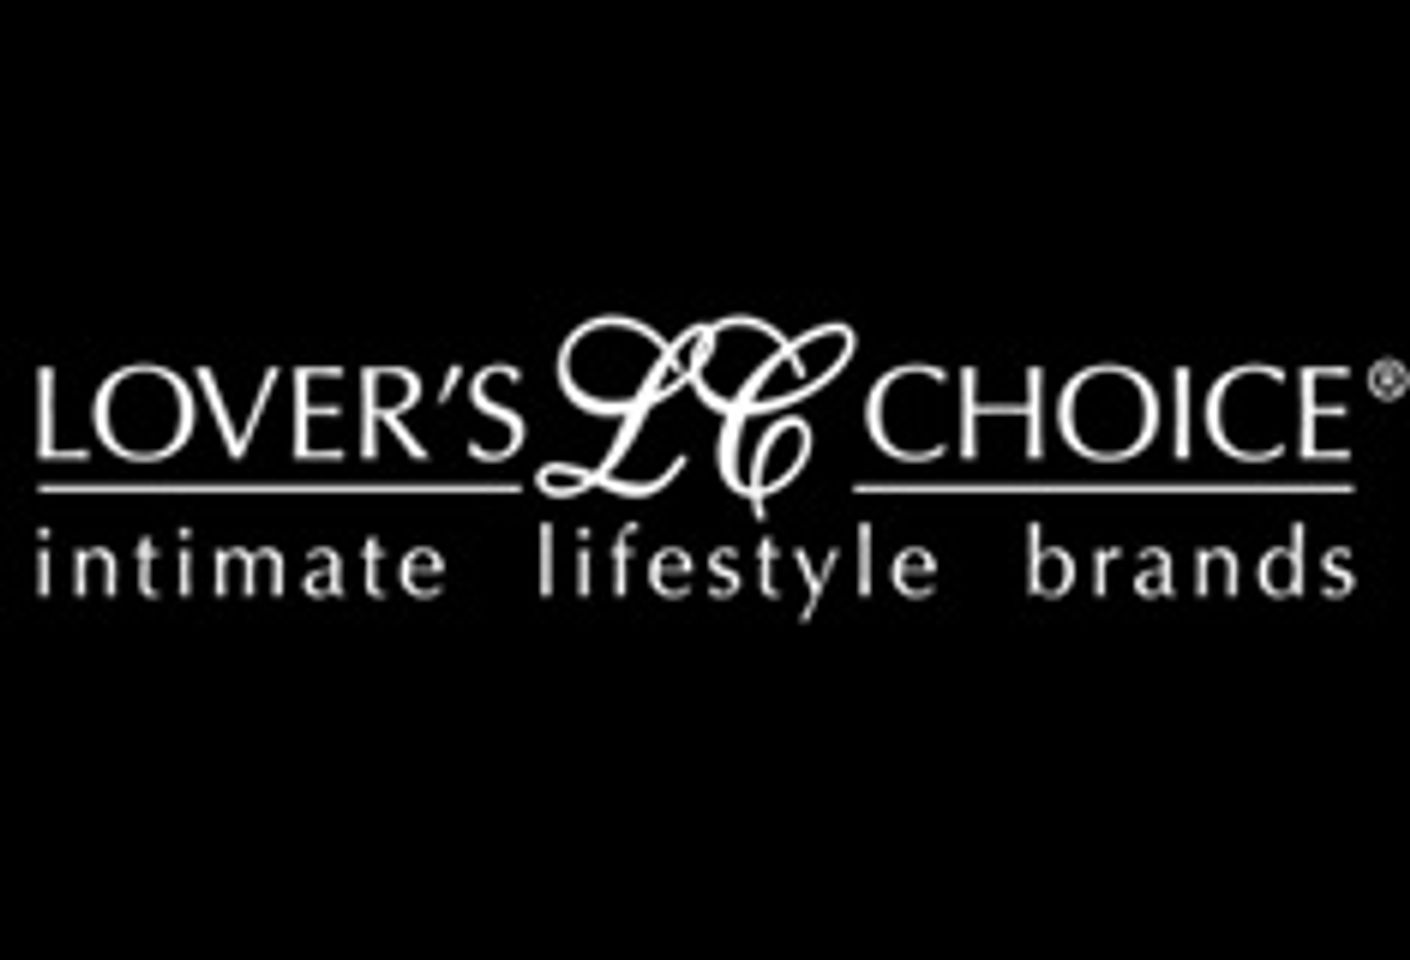 Winners of Lover's Choice Contest Announced